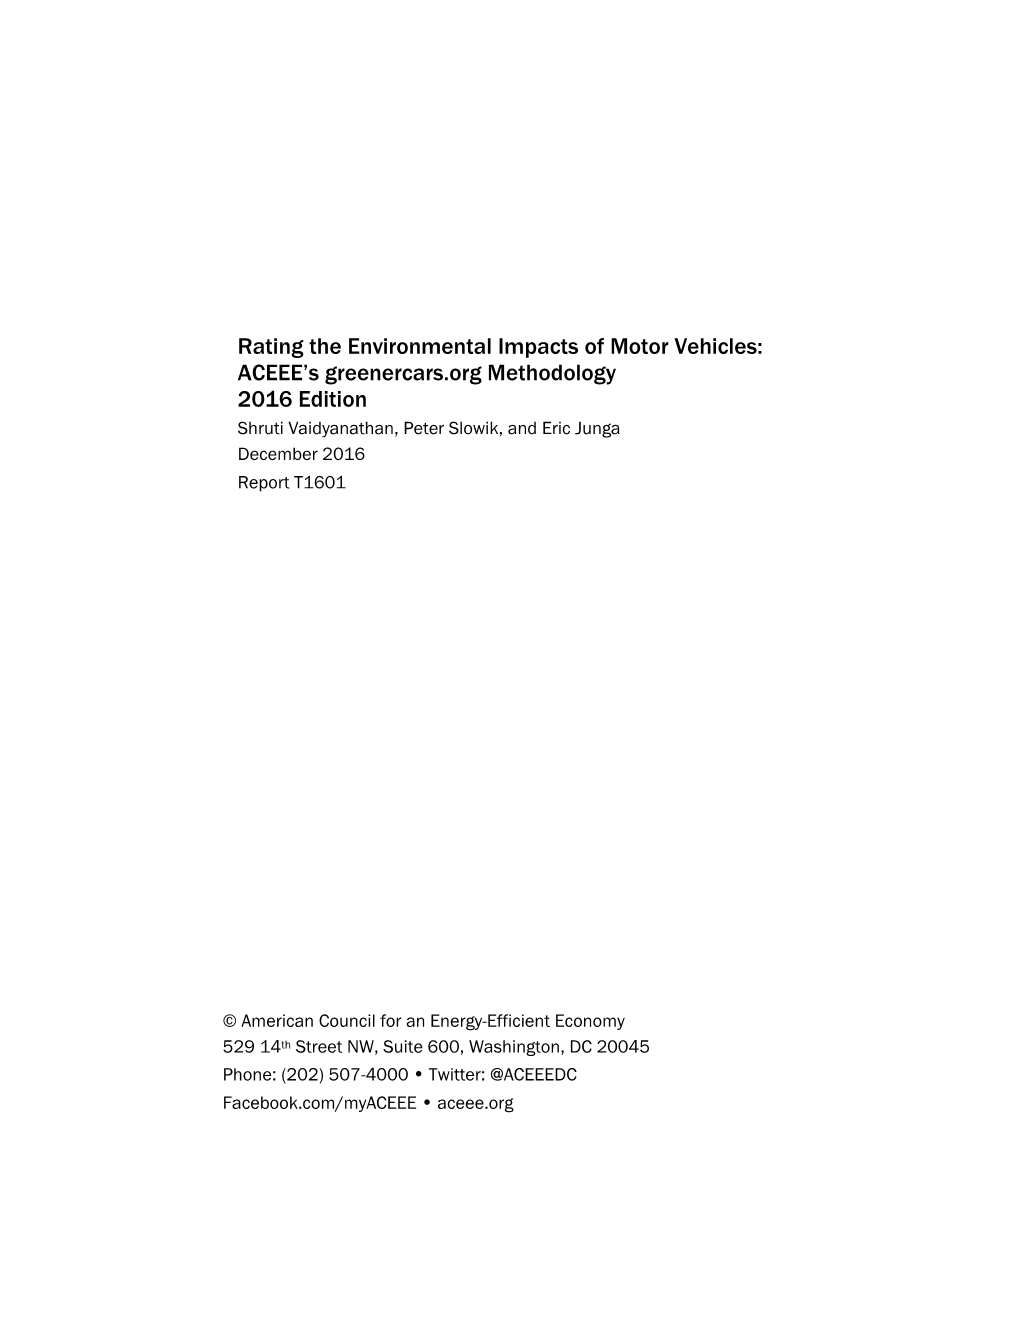 Rating the Environmental Impacts of Motor Vehicles: ACEEE's